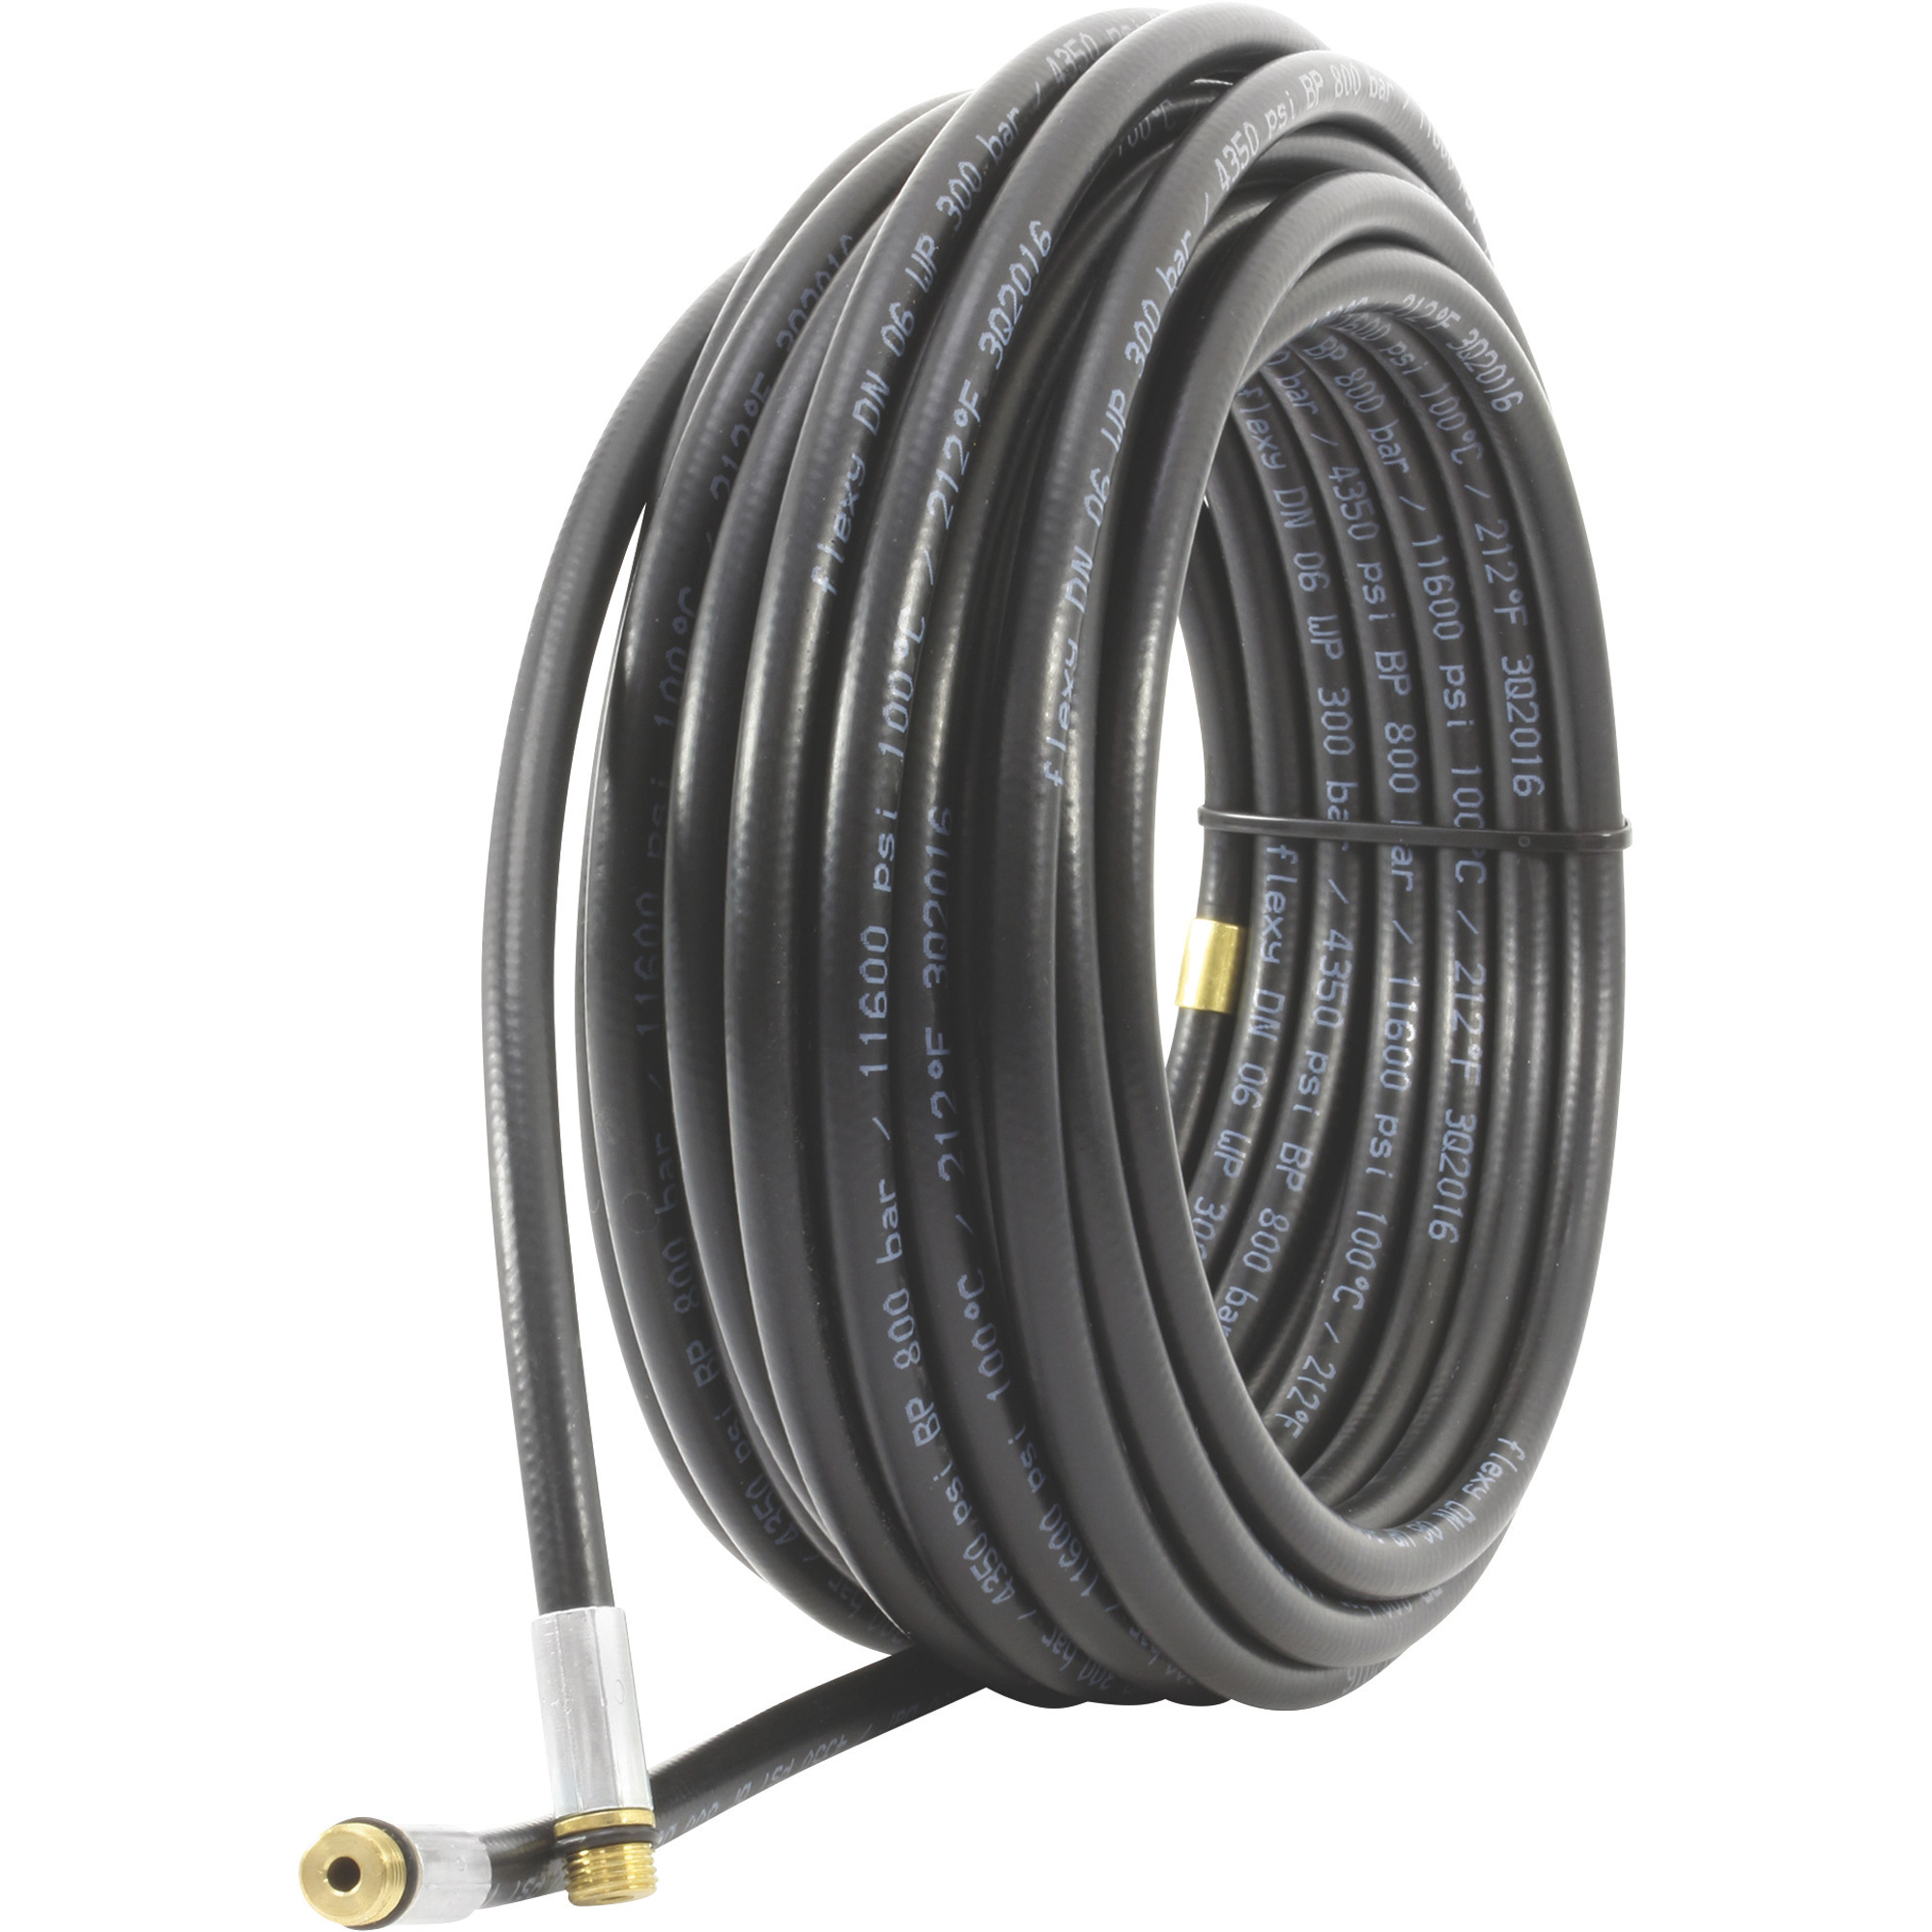 DTE Sewer Jetting Hose, 4500 PSI, 150ft. x 1/4Inch